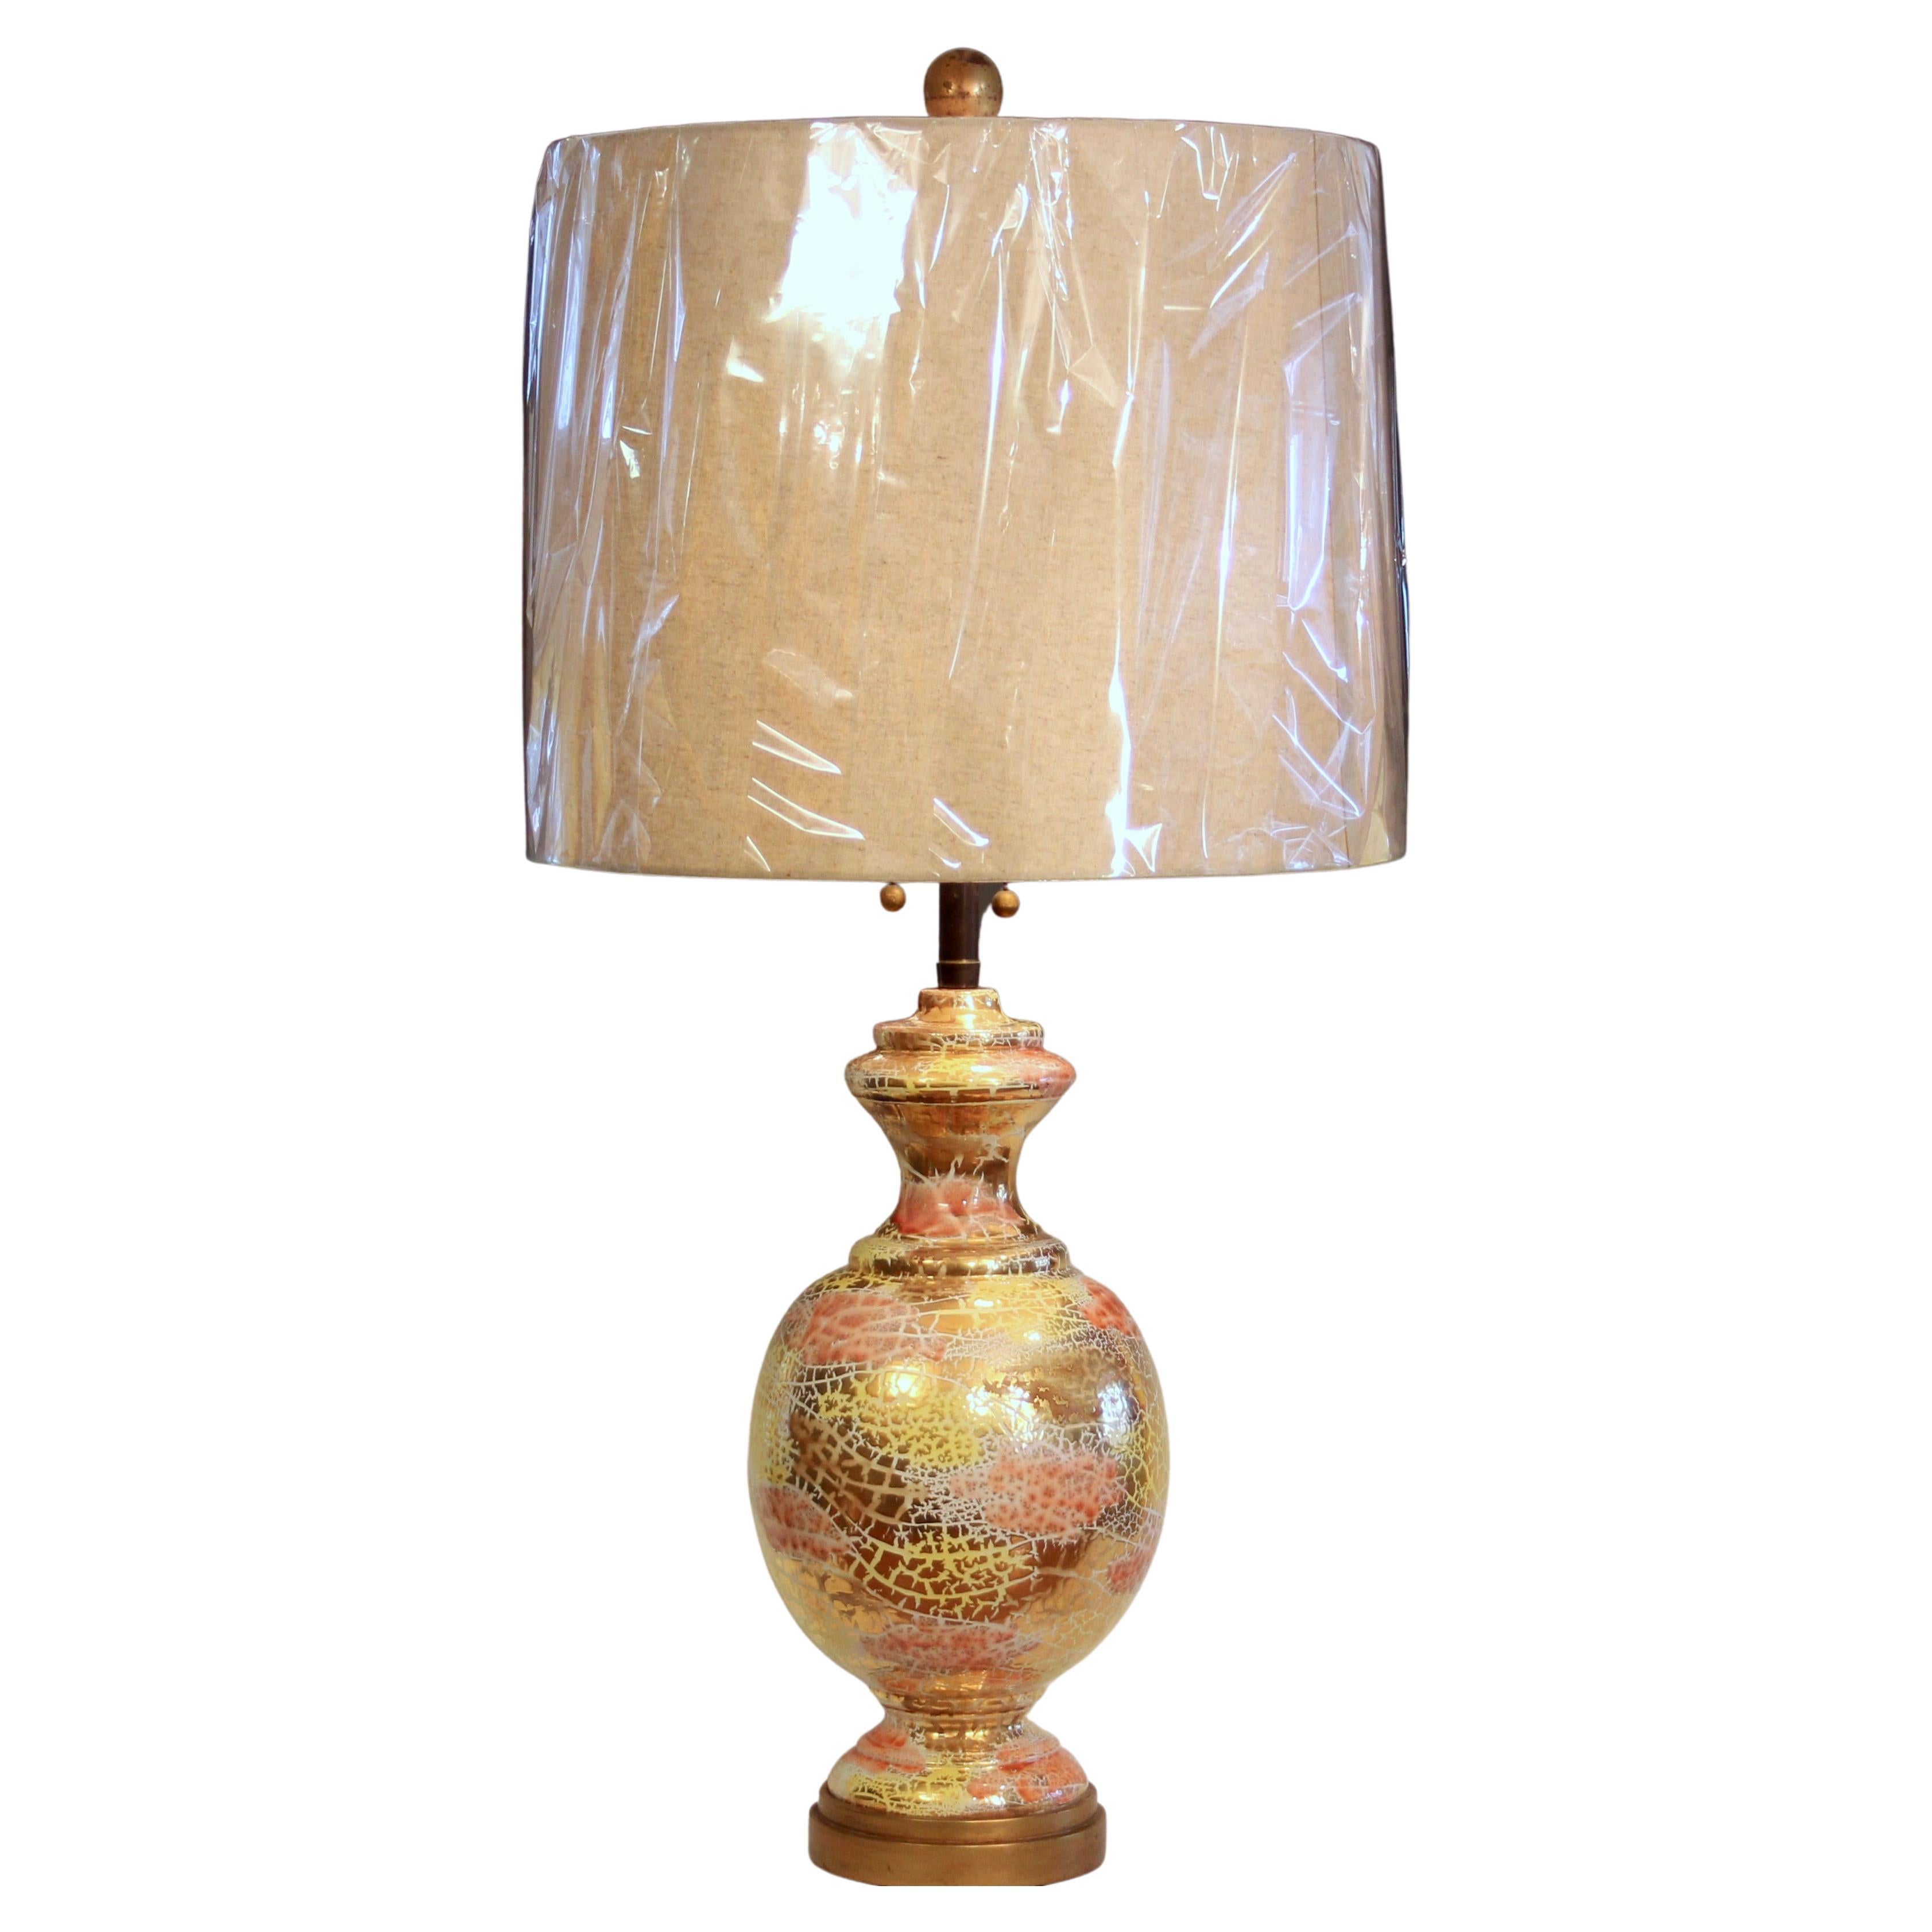 Large Bitossi lamp in Oro Rotto decor for the Marbro Lamp Company, circa 1960's. Gilt wooden base. Double socket cluster with smooth pulls. Extra large gilt wood finial. 45